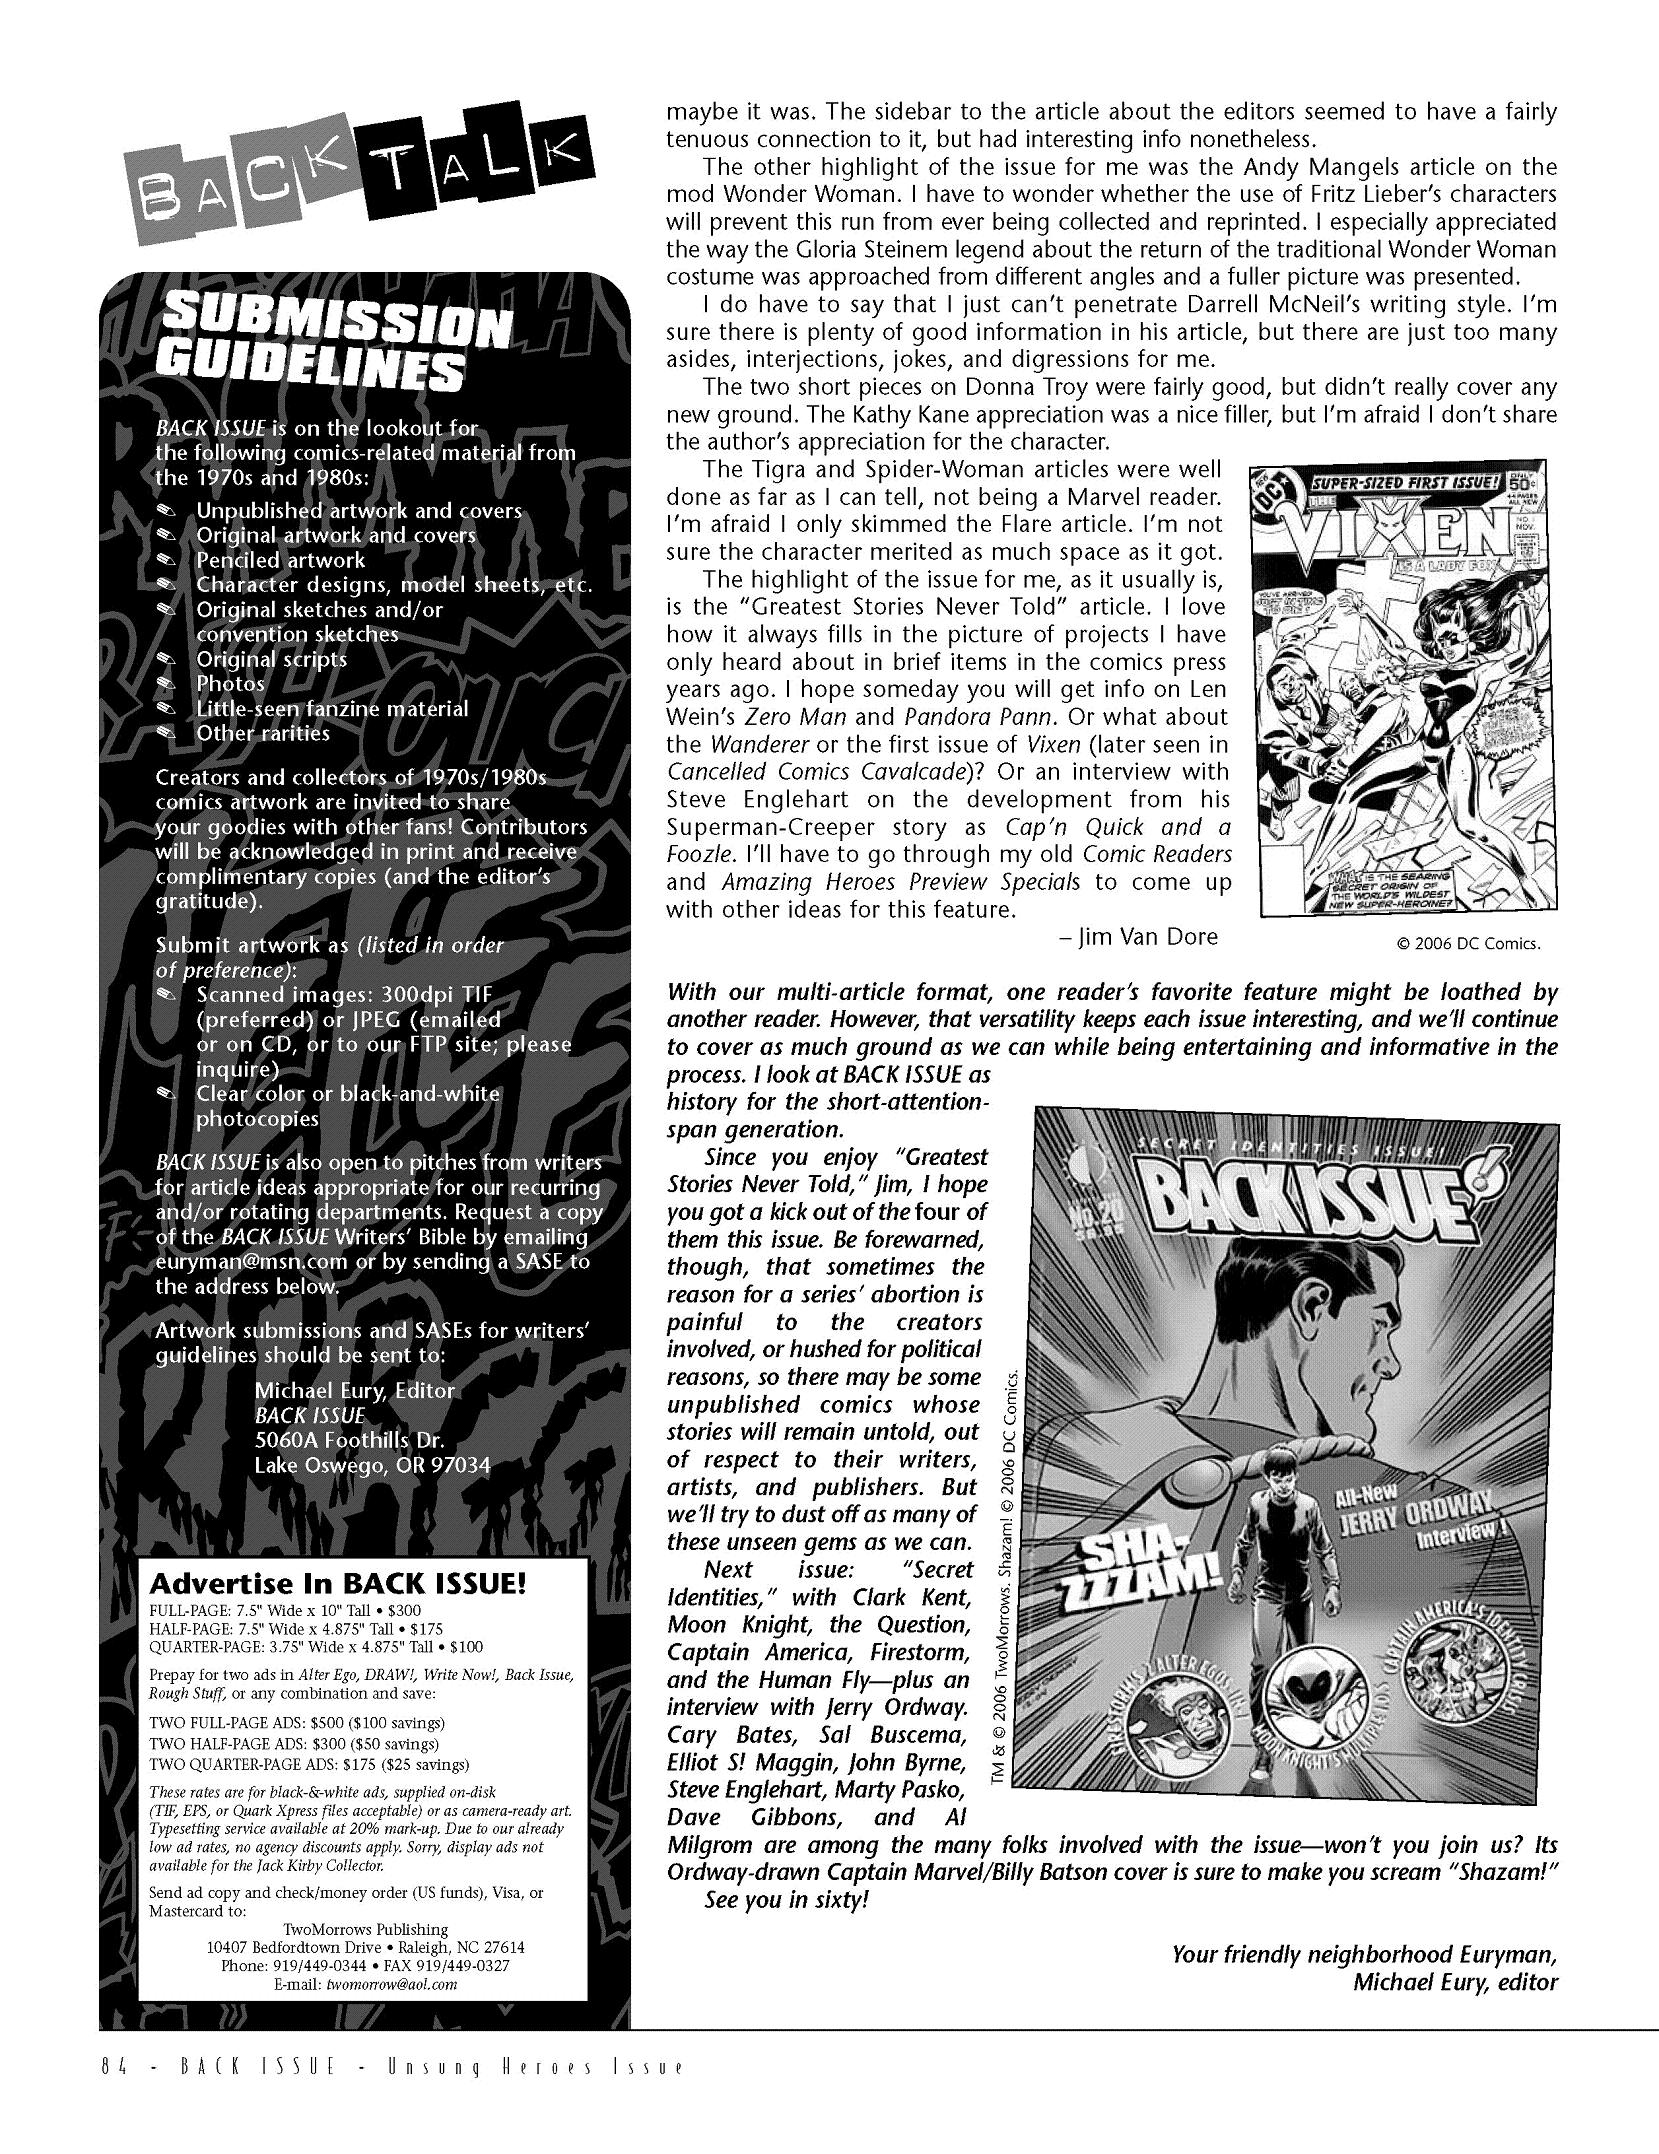 Read online Back Issue comic -  Issue #19 - 80